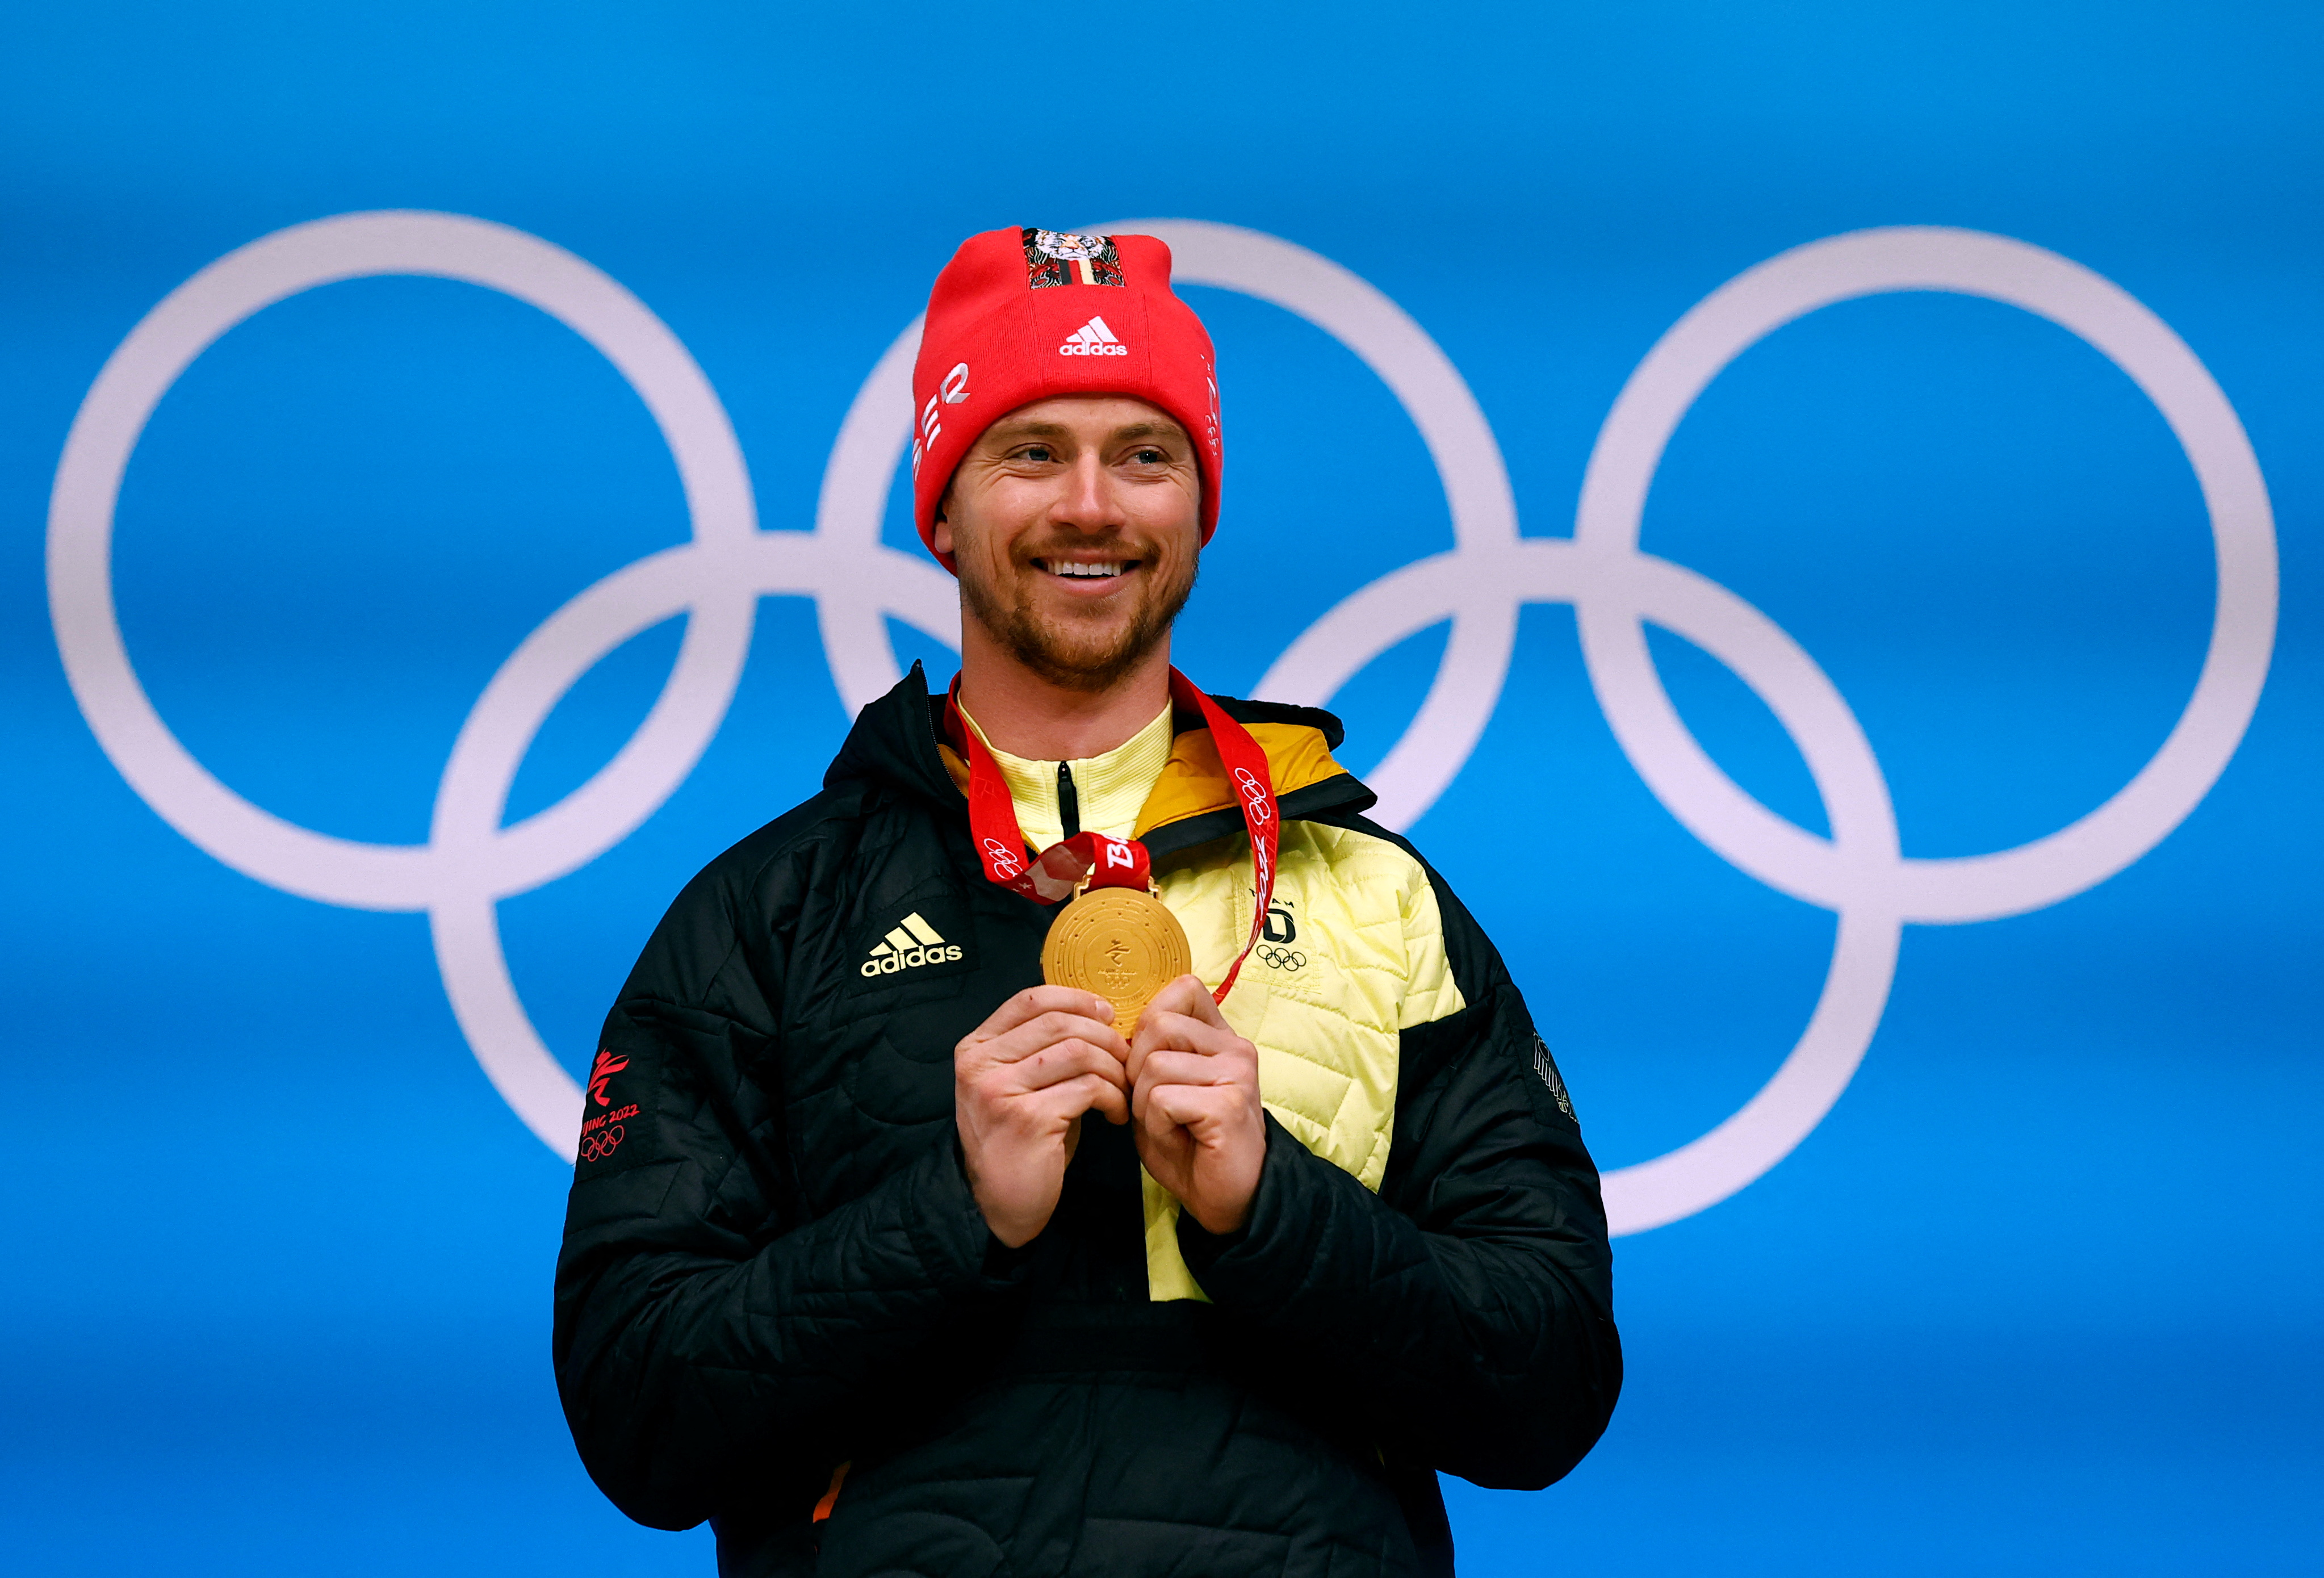 FILE PHOTO: 2022 Beijing Olympics - Victory Ceremony - Luge - Men - National Sliding Centre, Beijing, China - February 6, 2022. Johannes Ludwig of Germany poses with his gold medal after winning. REUTERS/Thomas Peter/File Photo